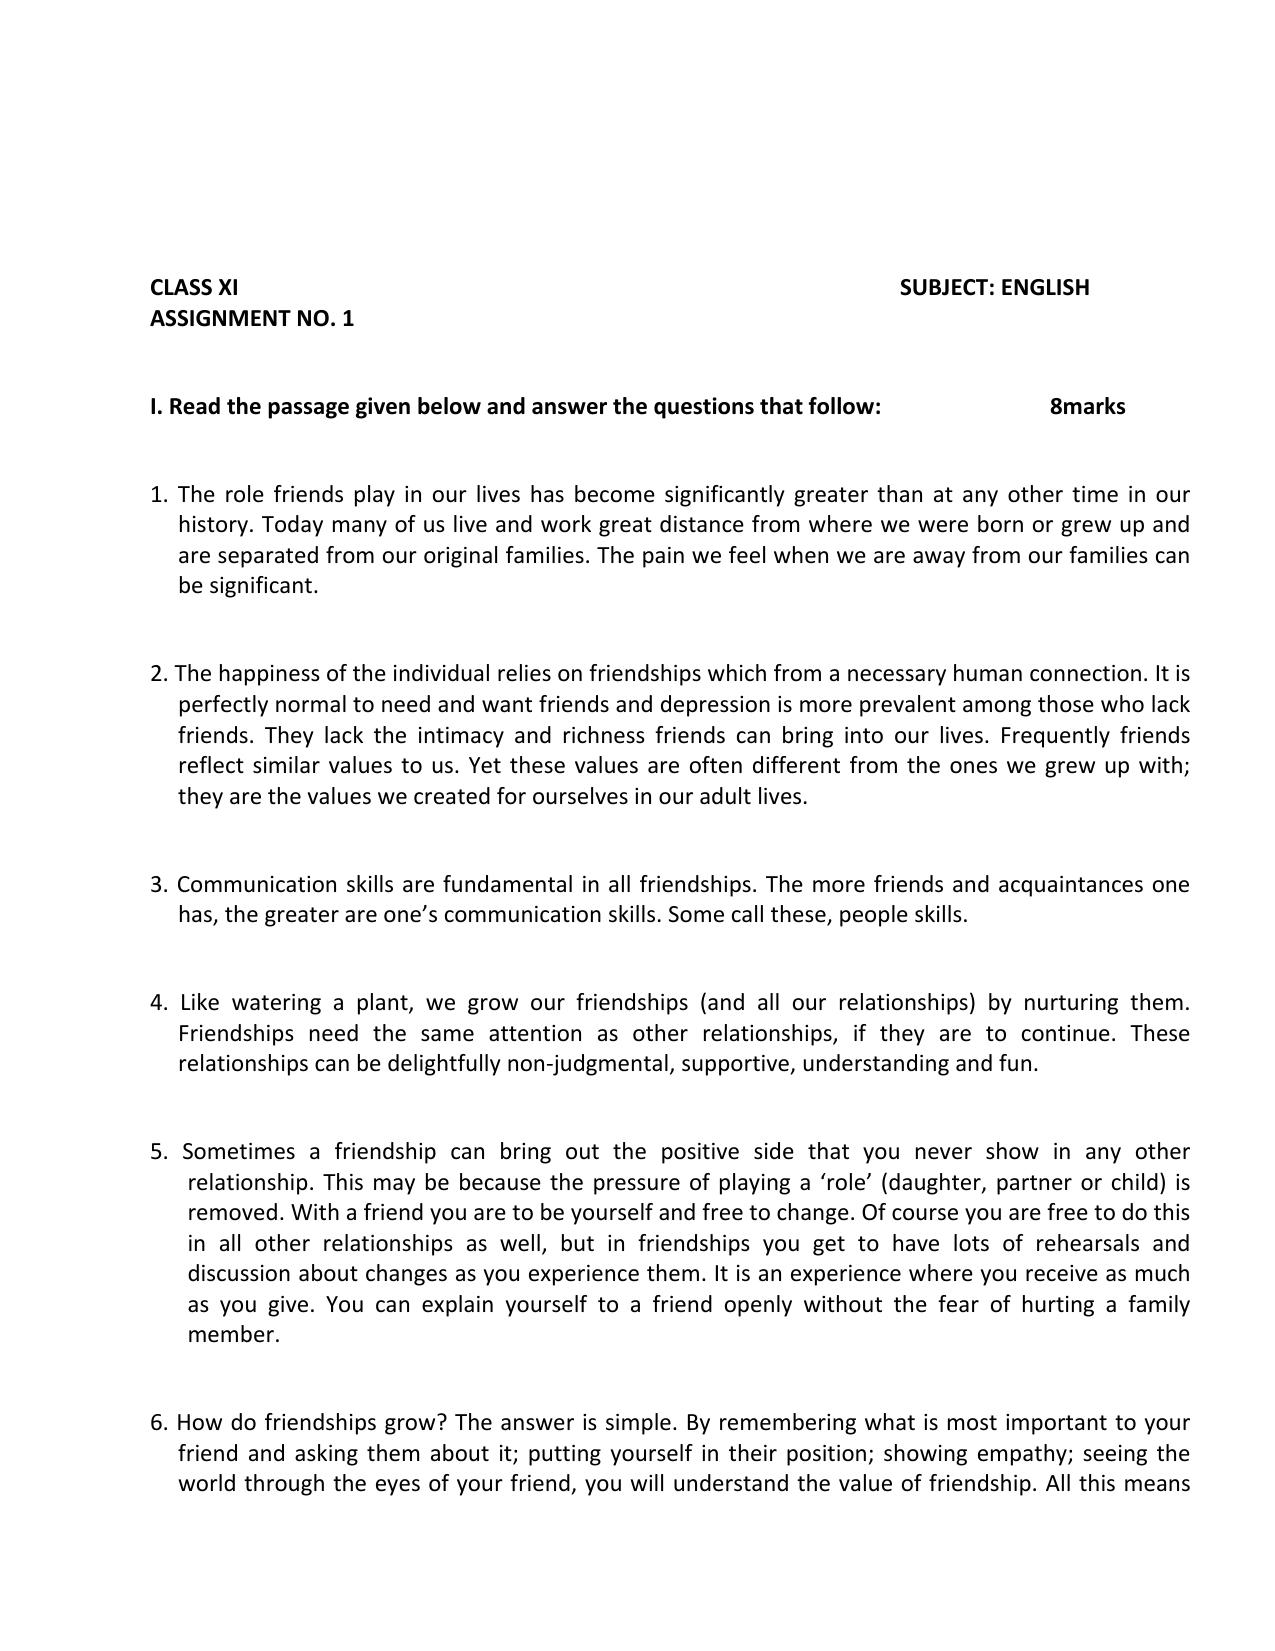 CBSE Worksheets for Class 11 English Assignment 1 - Page 1